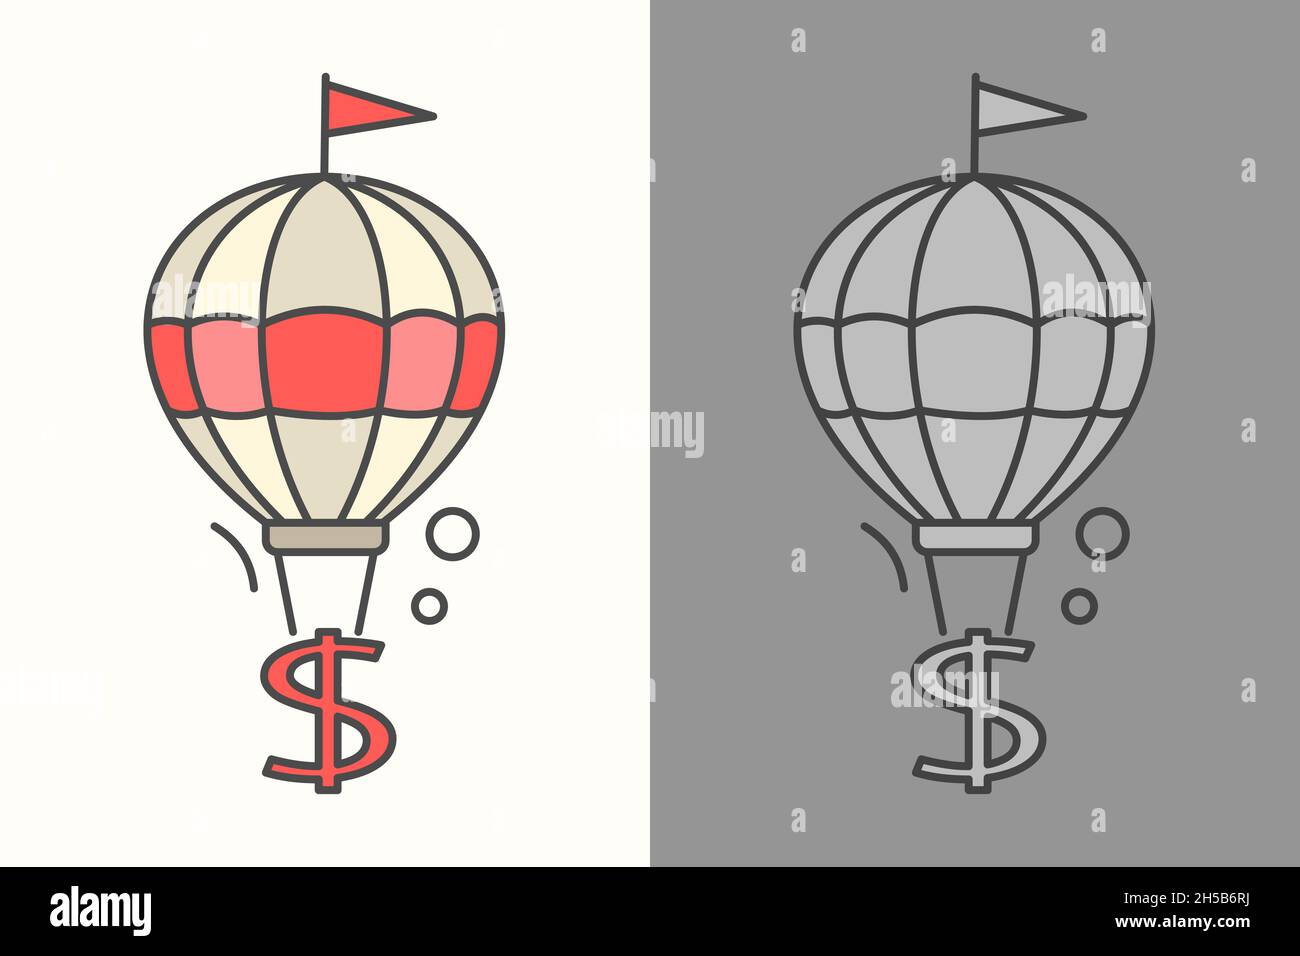 Hot air balloon with US Dollar sign. Finance, economy, money concept. Flat style illustration. Isolated. Stock Vector